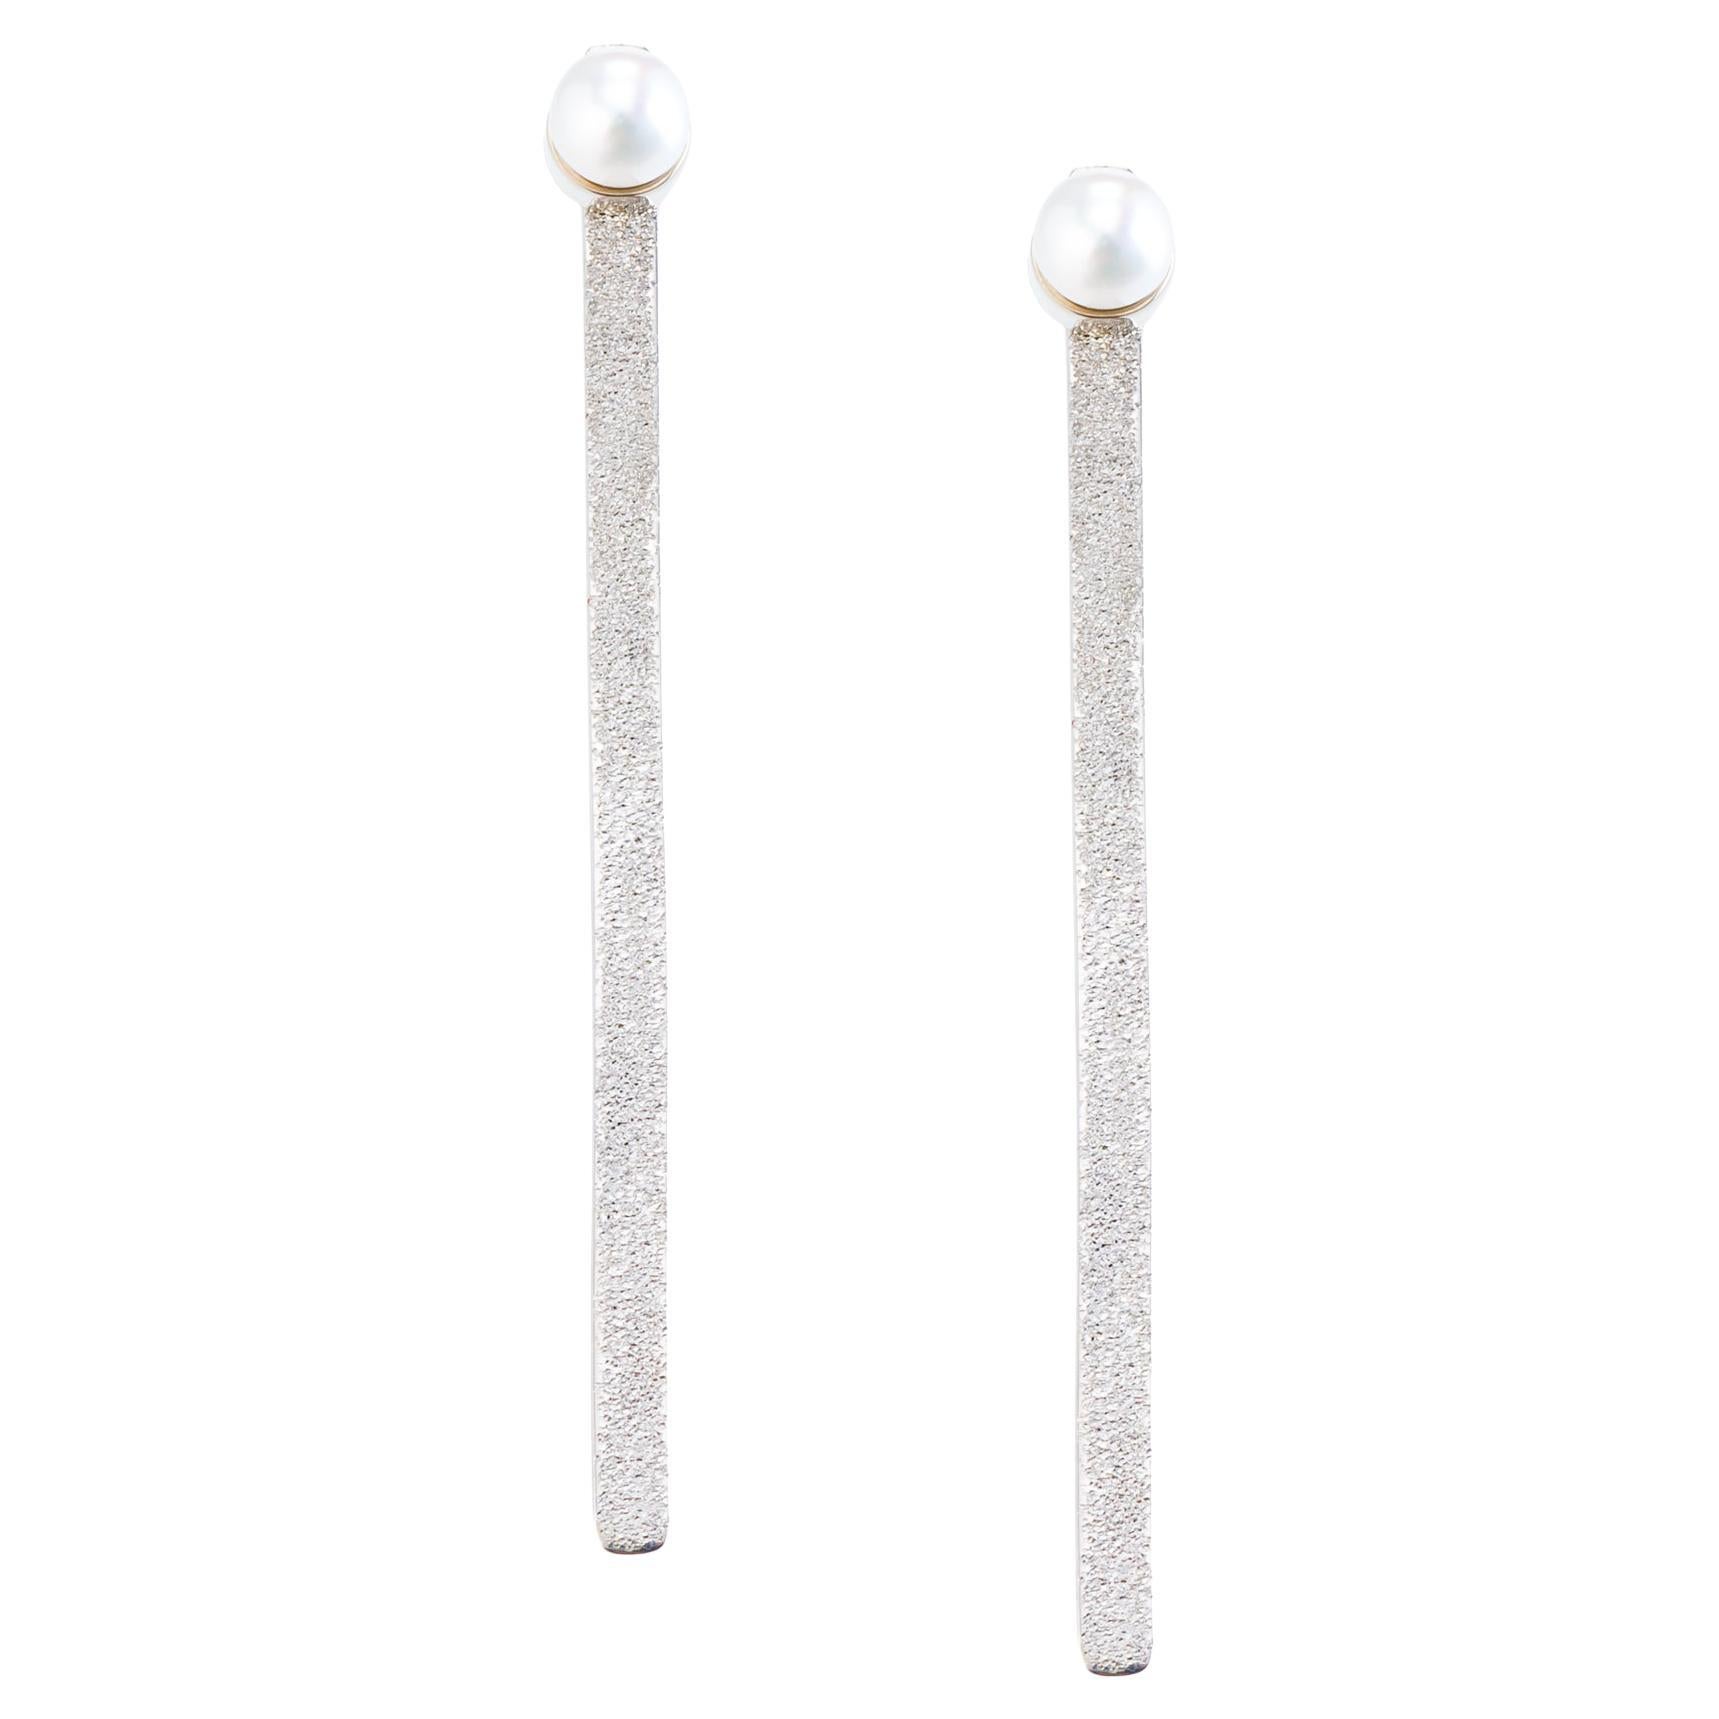 Theodora D.  Moon Ray Earrings White Gold 18K Diamond cut / Freshwater Pearls For Sale